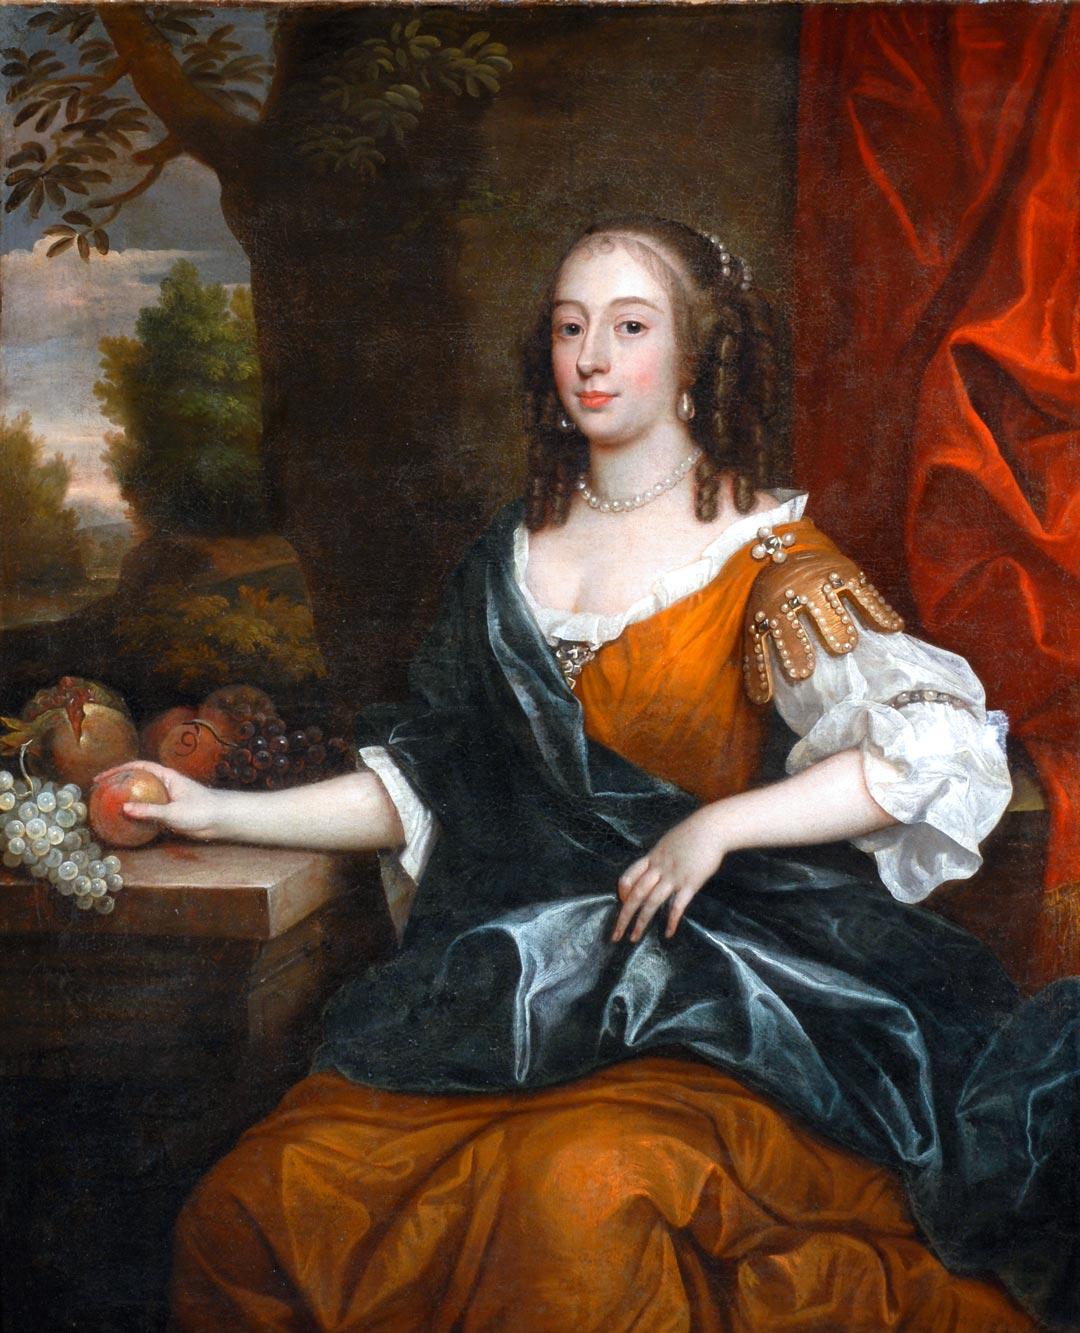 Unknown artist, French School of Mignard - Portrait of a Lady Holding an Apple c1680 Courtesy of The Bowes Museum, Barnard Castle, UK